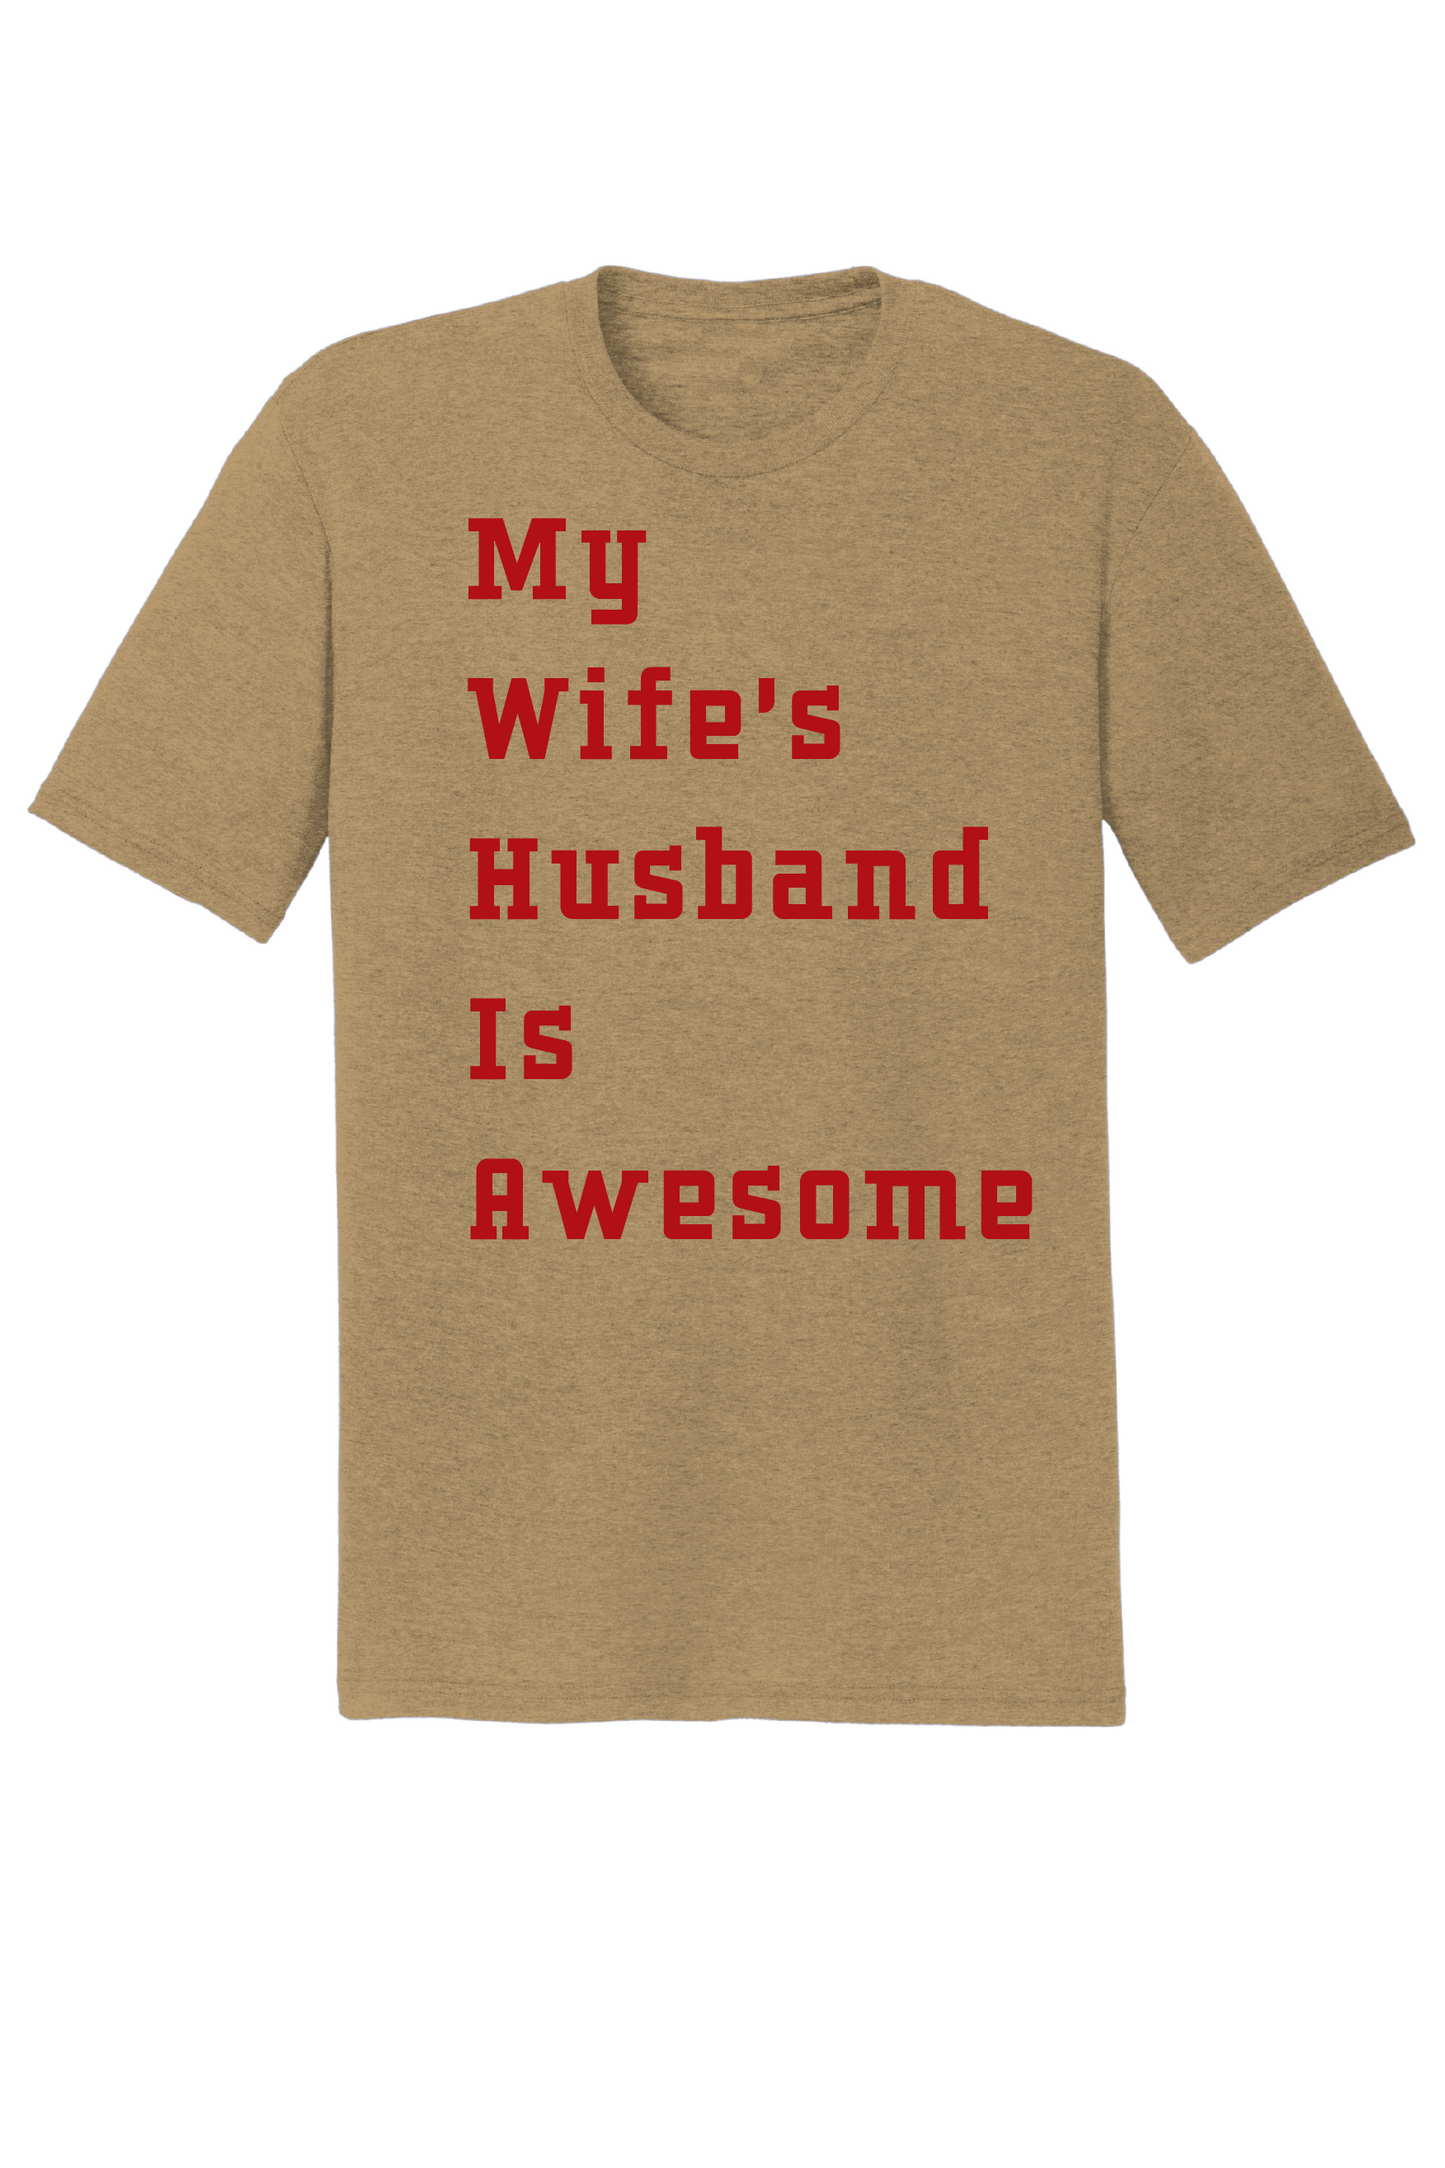 My Wife's Husband is Awesome Tee